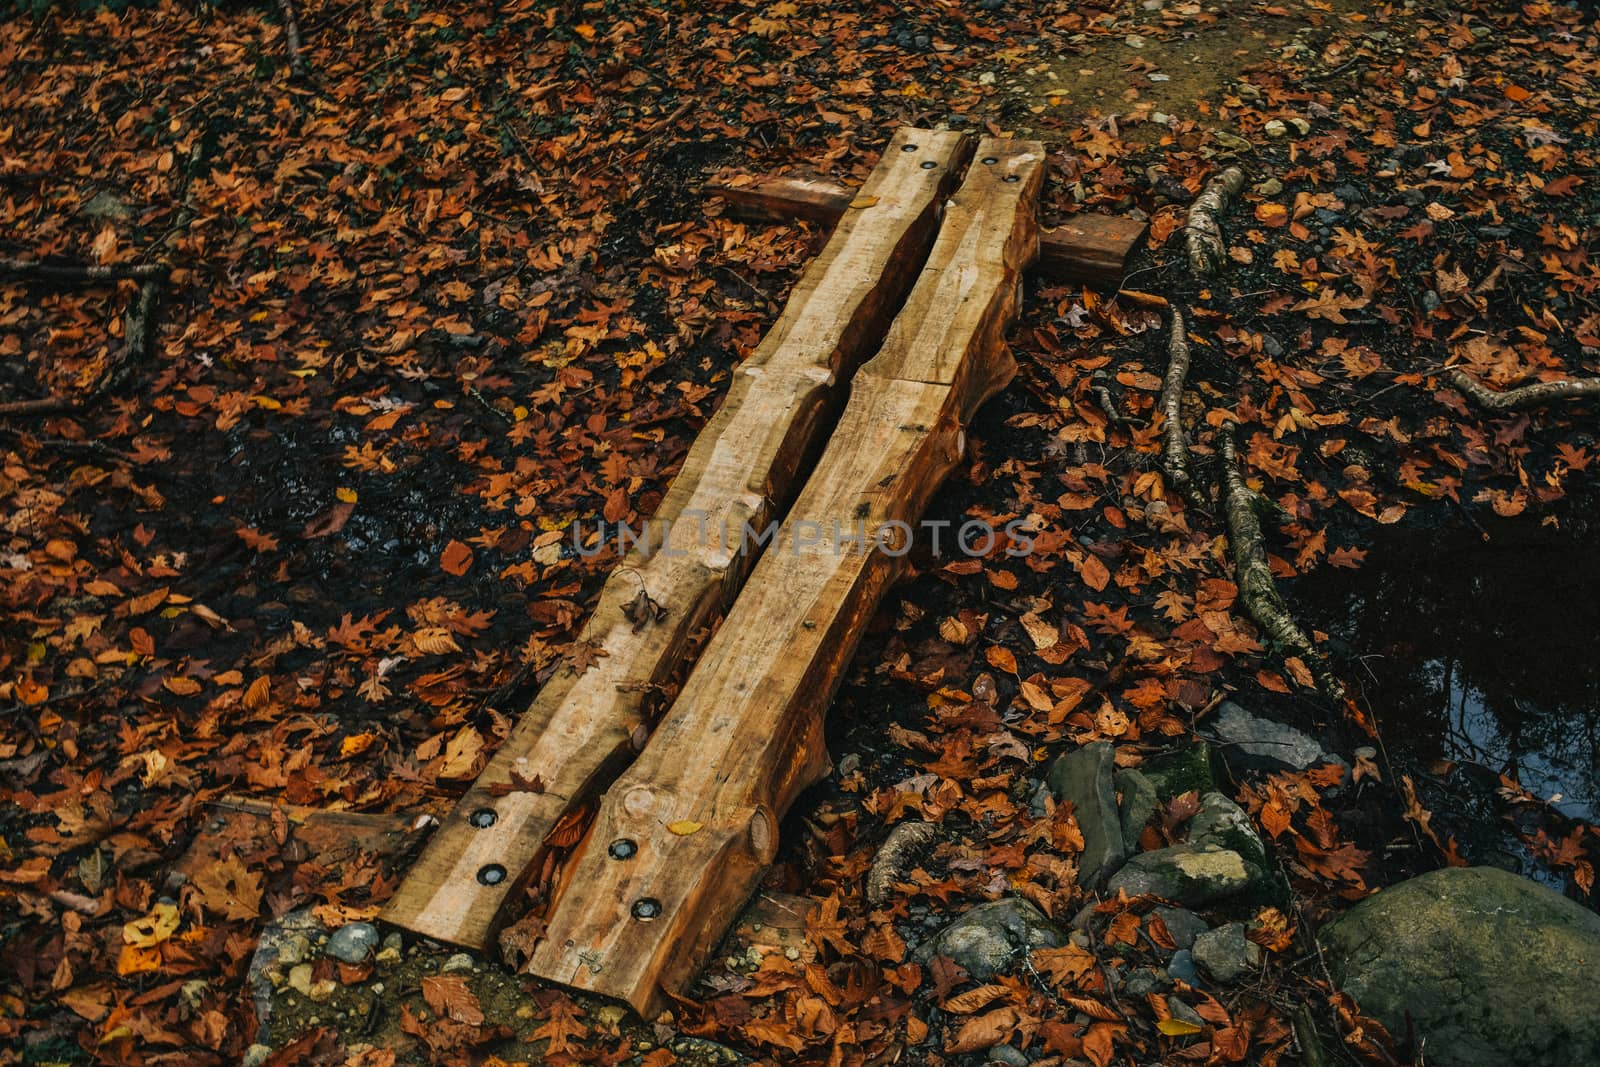 A Small Man-Made Wooden Bridge Used to Cross a Creek